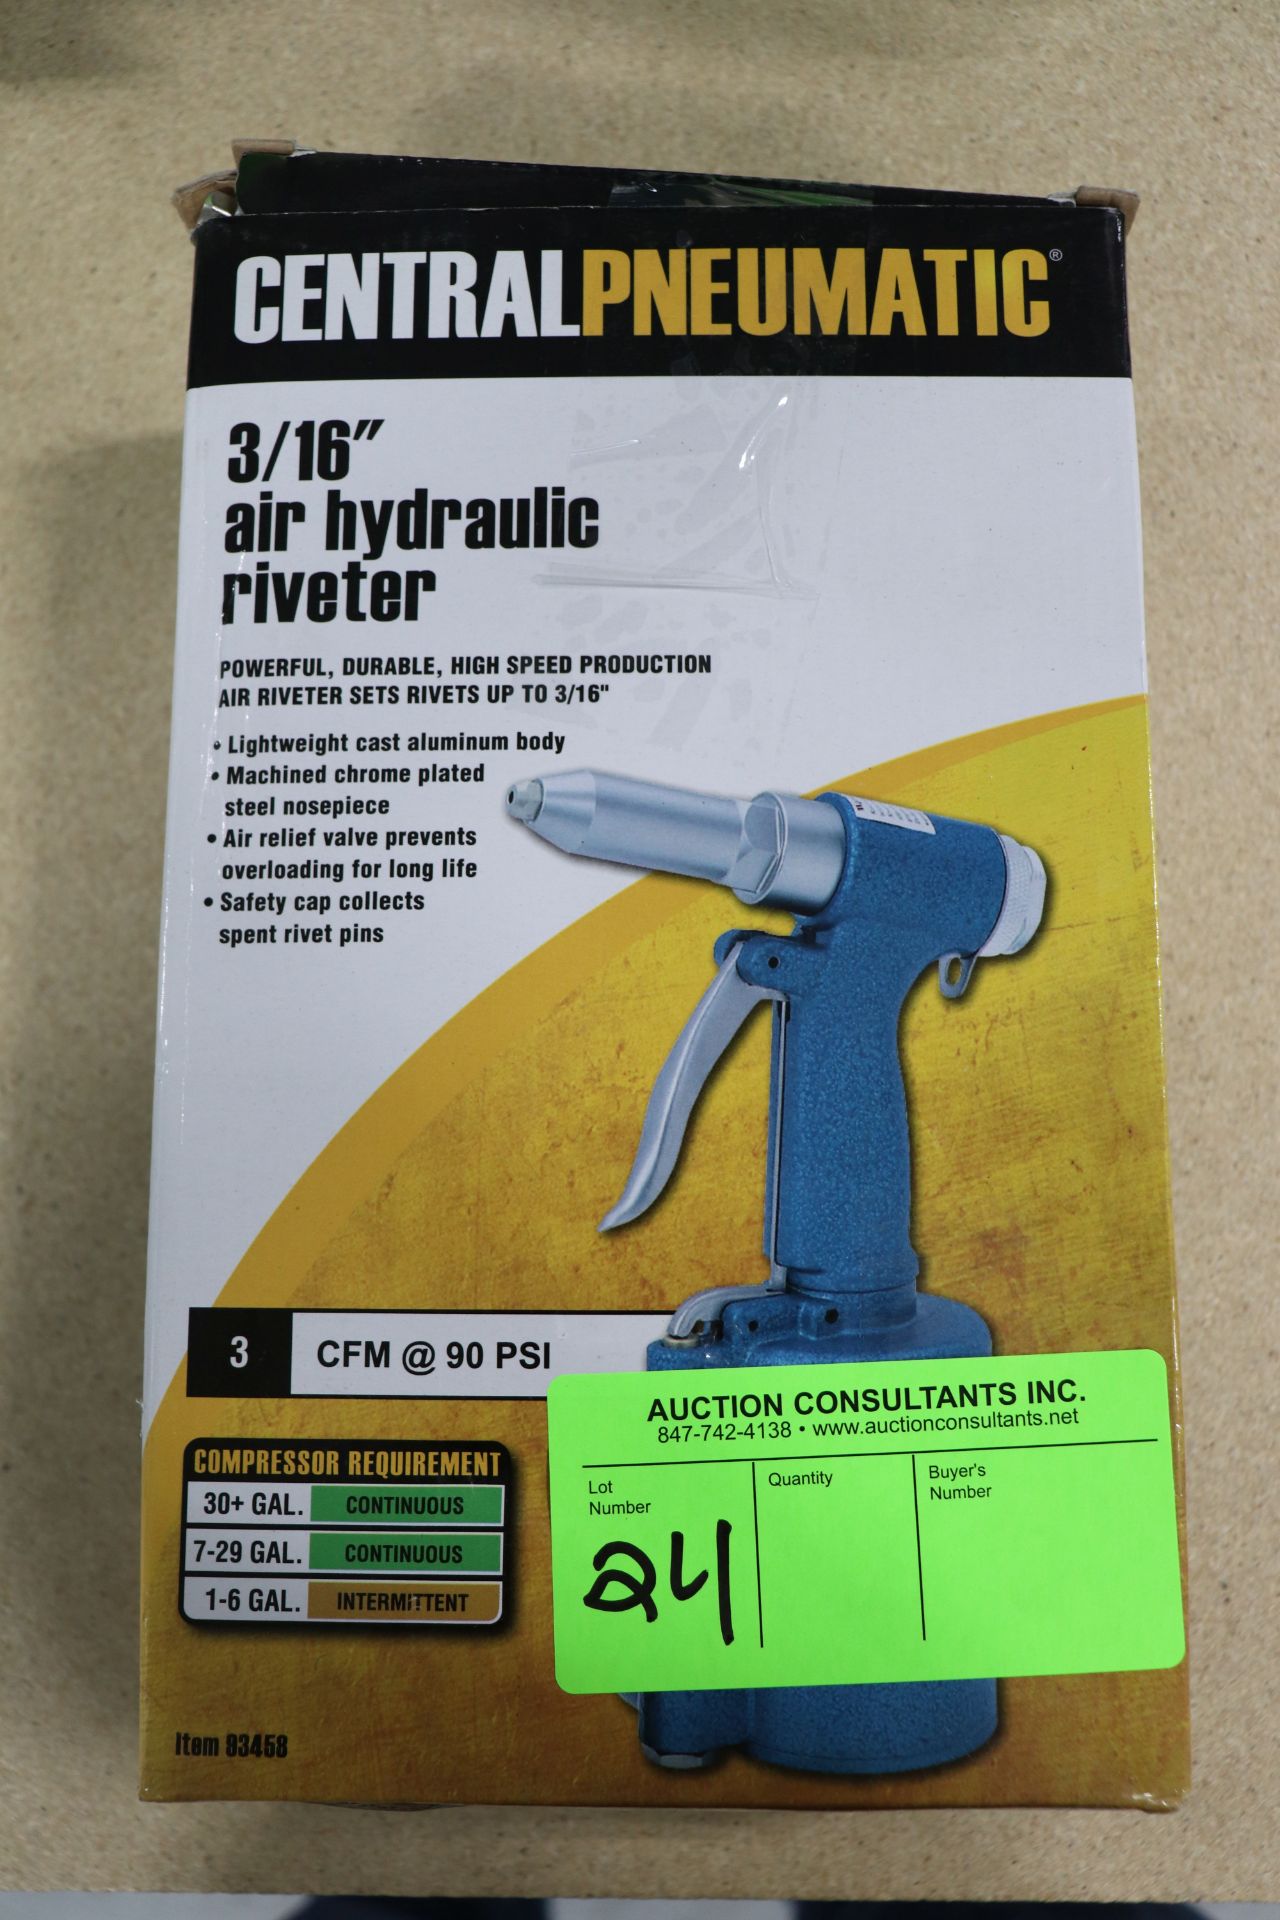 Central pneumatic 3/16 air hydraulic riverter in box